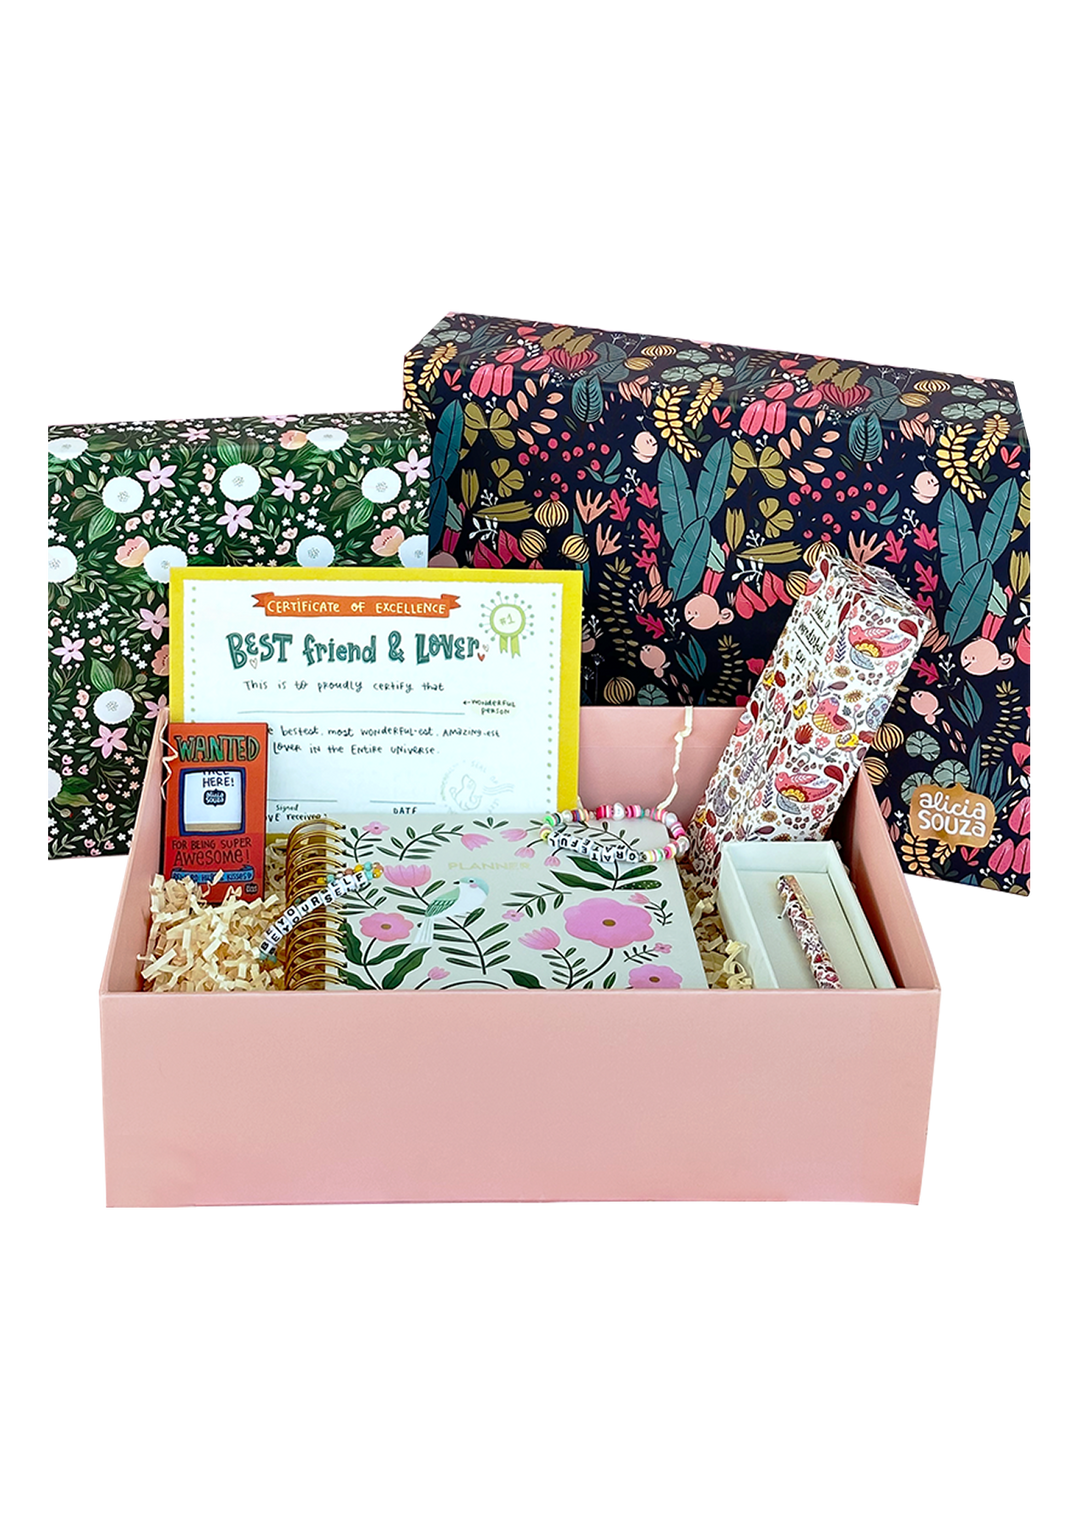 Heart's Desire Gift Box  | Get FREE Lover Certificate